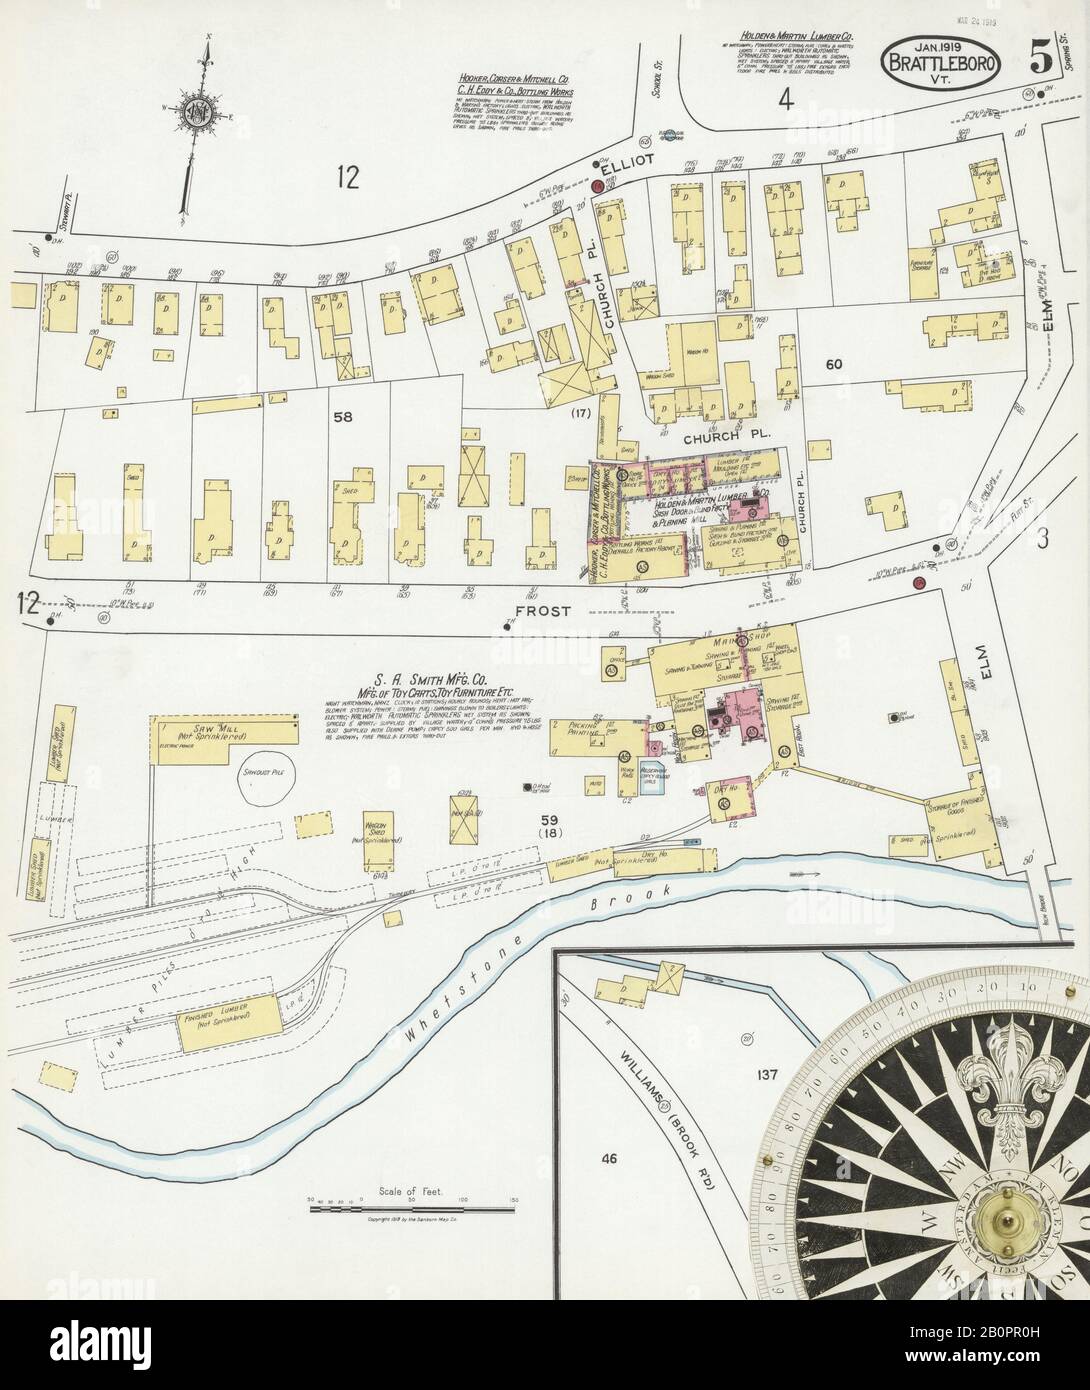 Image 5 of Sanborn Fire Insurance Map from Brattleboro, Windham County, Vermont. Jan 1919. 19 Sheet(s), America, street map with a Nineteenth Century compass Stock Photo